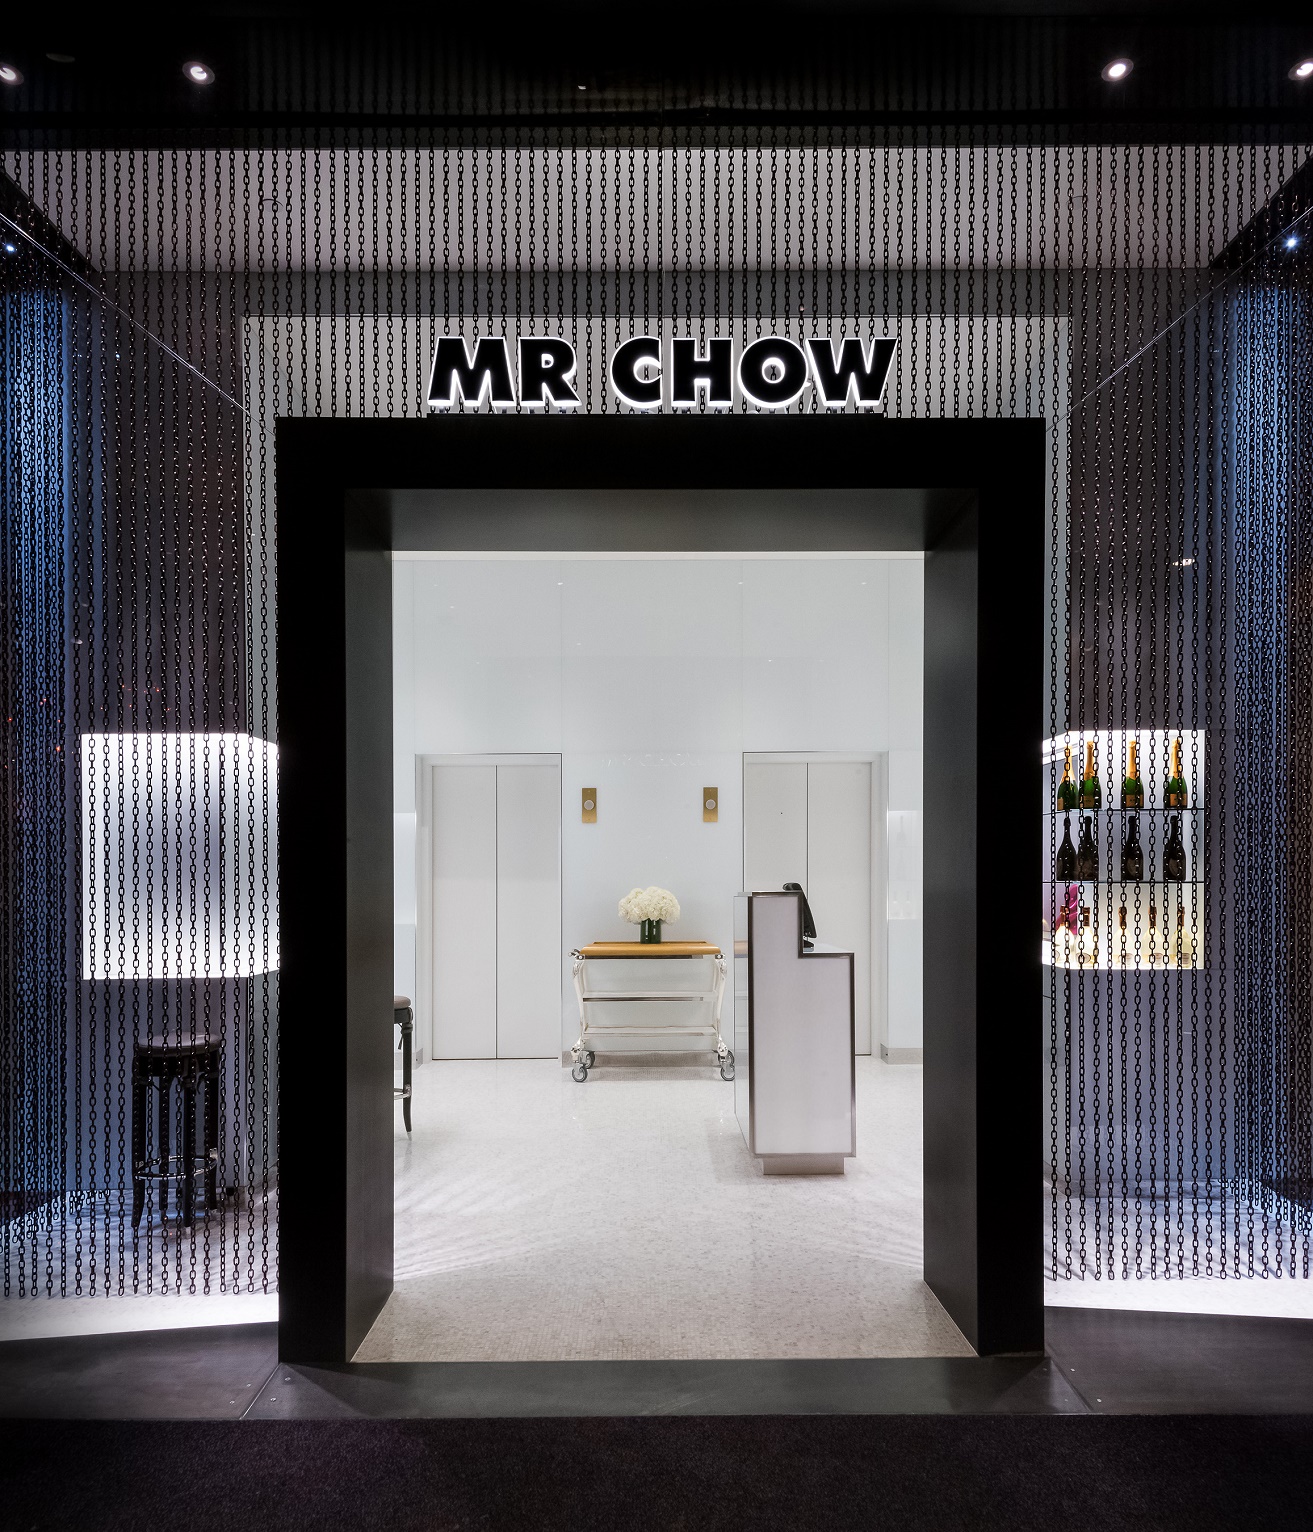 Mr Chow Restaurant is Now Open at Caesars